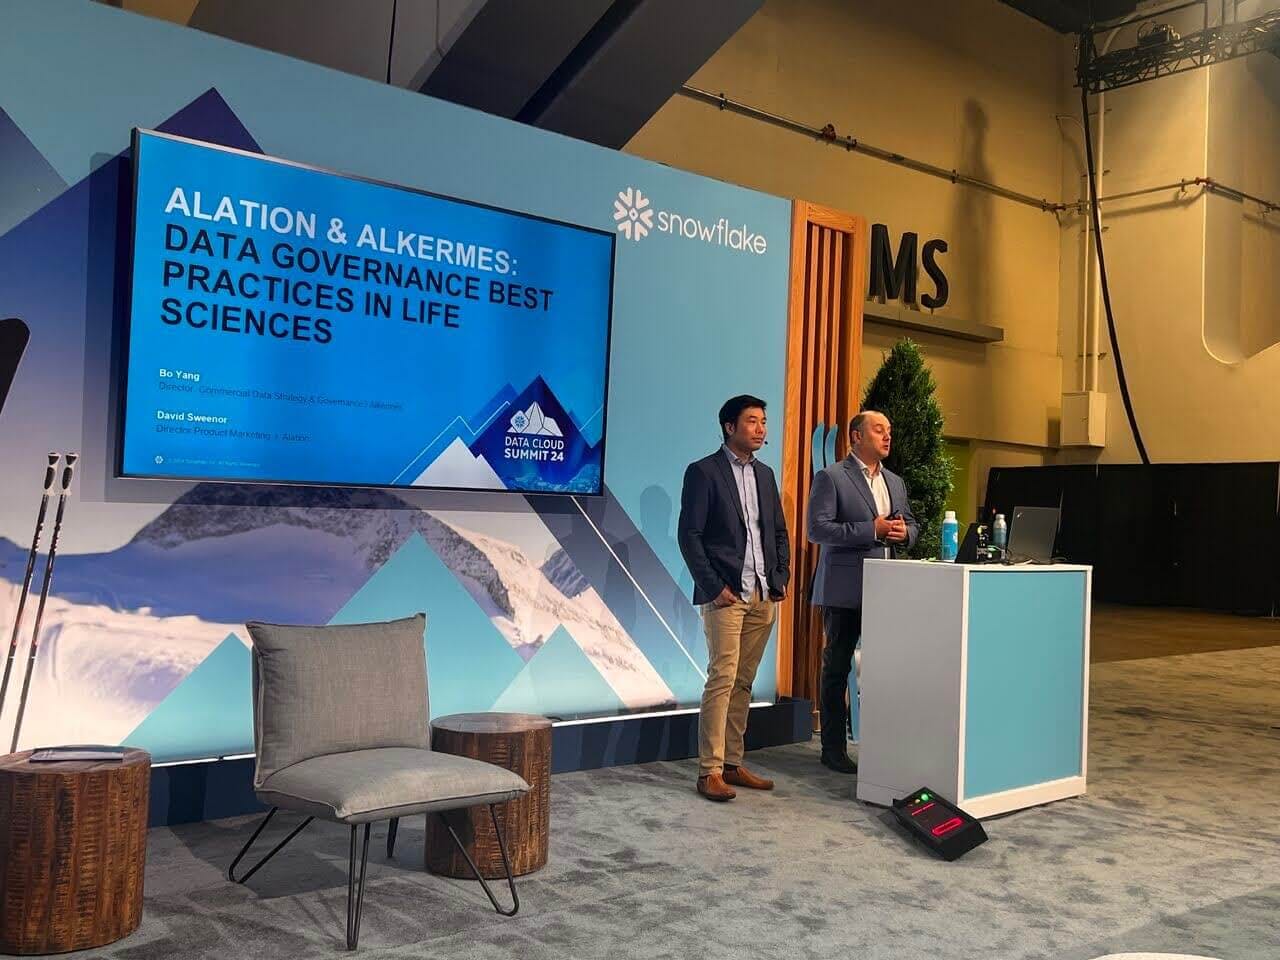 Bo Yang of Alkermes and David Sweenor of Alation presenting, "Data Governance Best Practices in Life Sciences" at Snowflake Summit 2024.